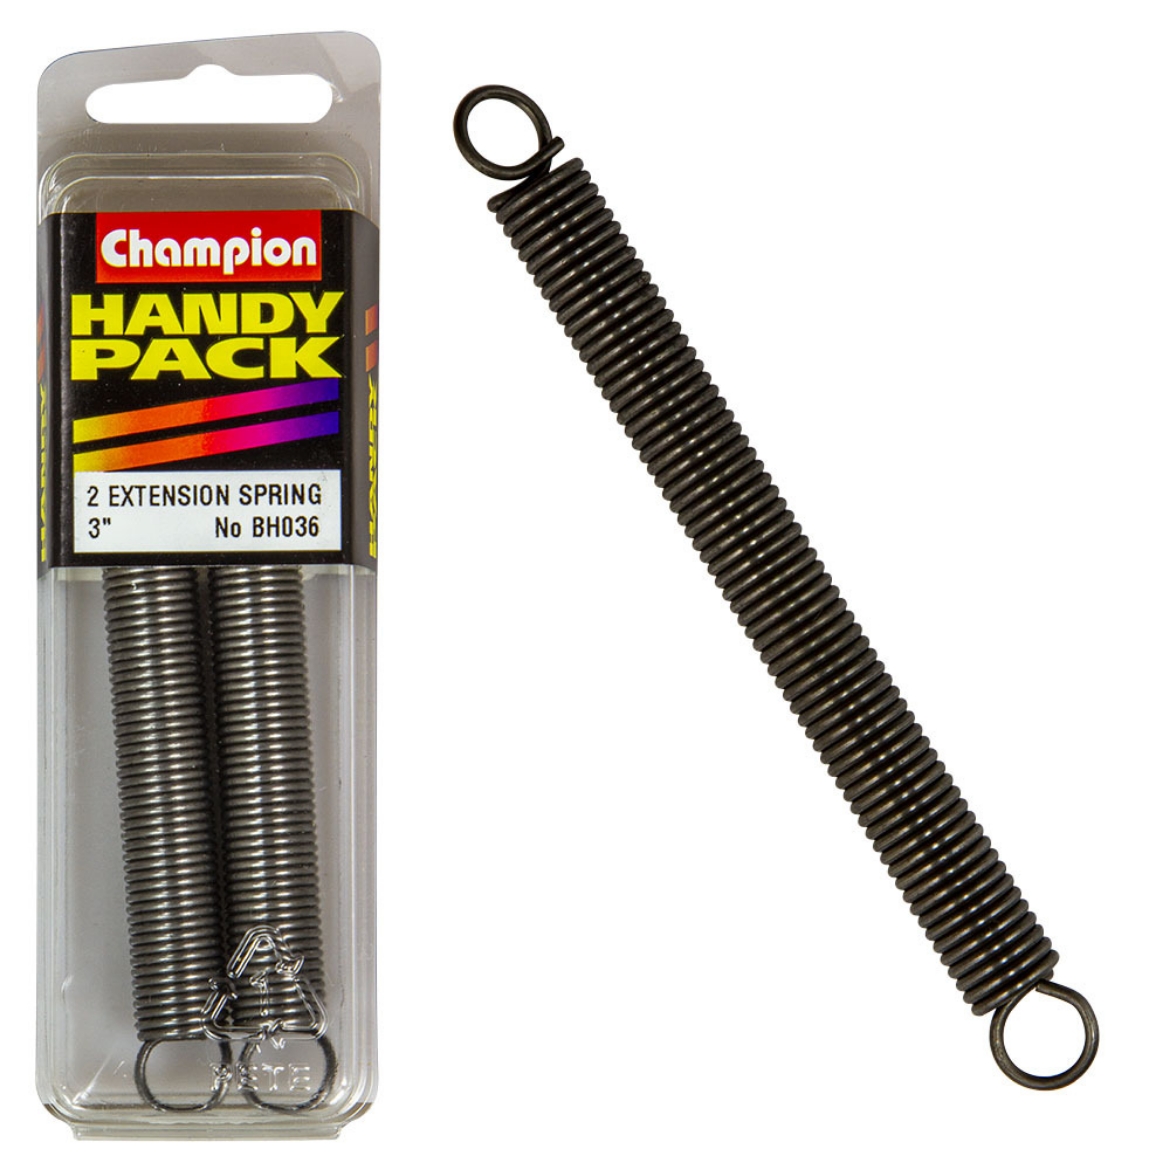 Picture of Handy Pk Extension Spring 3x7/16x18g CES (Pkt.2)